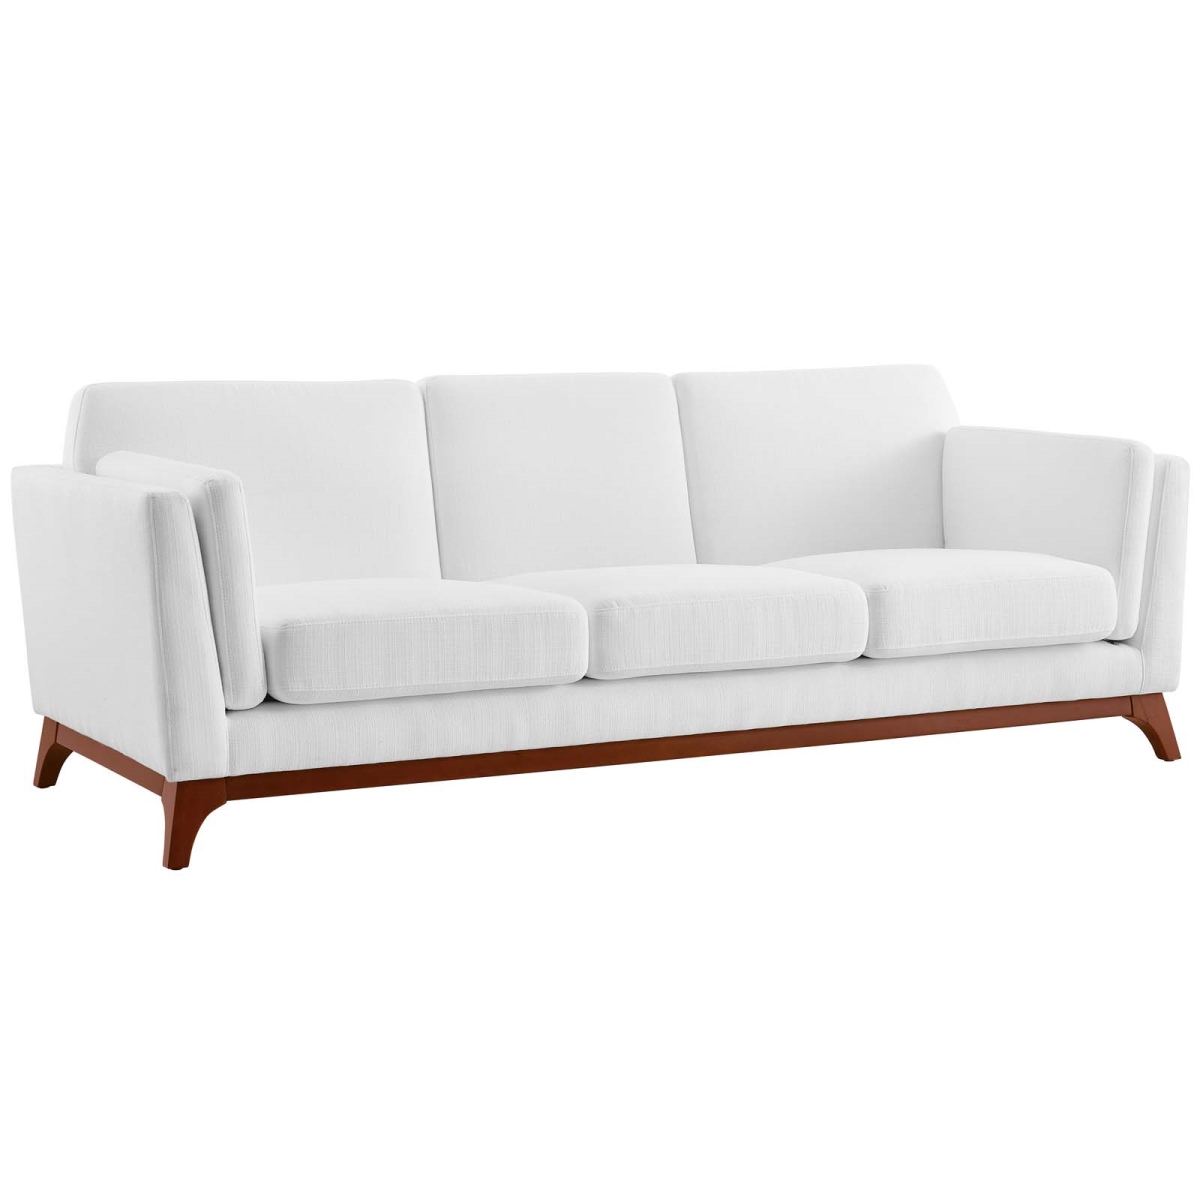 Eei-3062-whi Chance Upholstered Fabric Sofa - White, 30 X 35 X 83.5 In.